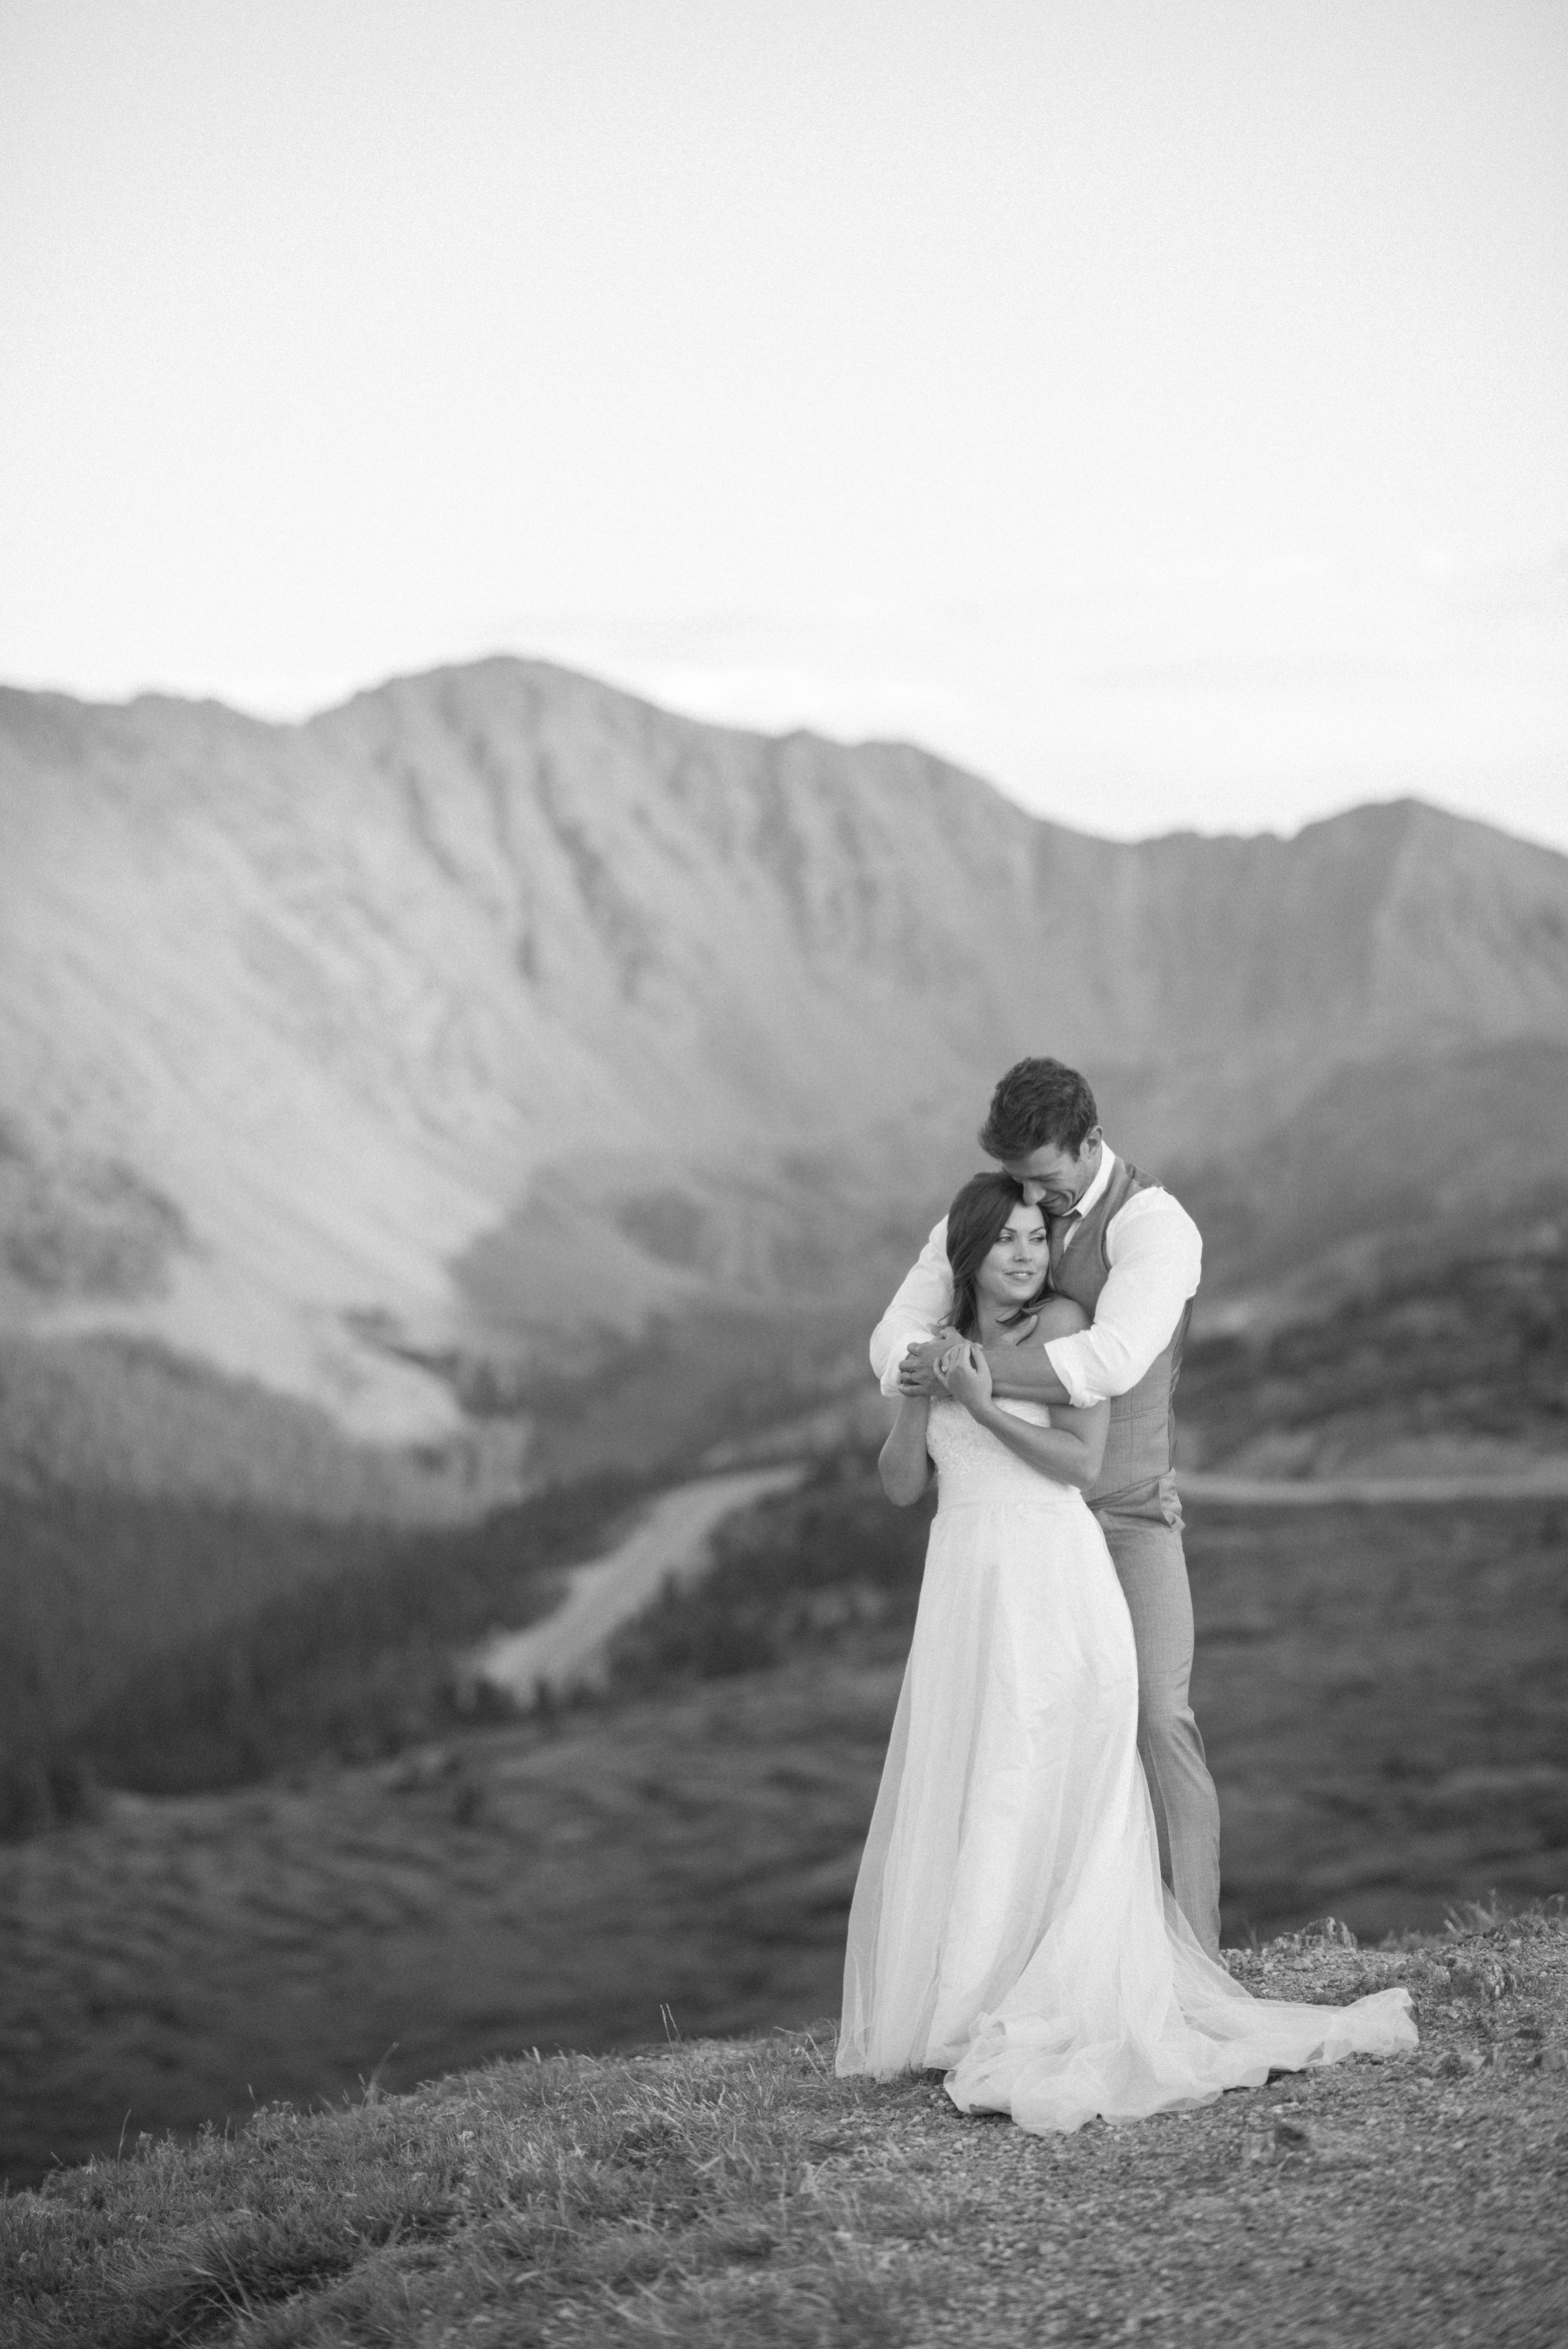 Holding one another close surrounded by mountain vistas during their mountain elopement